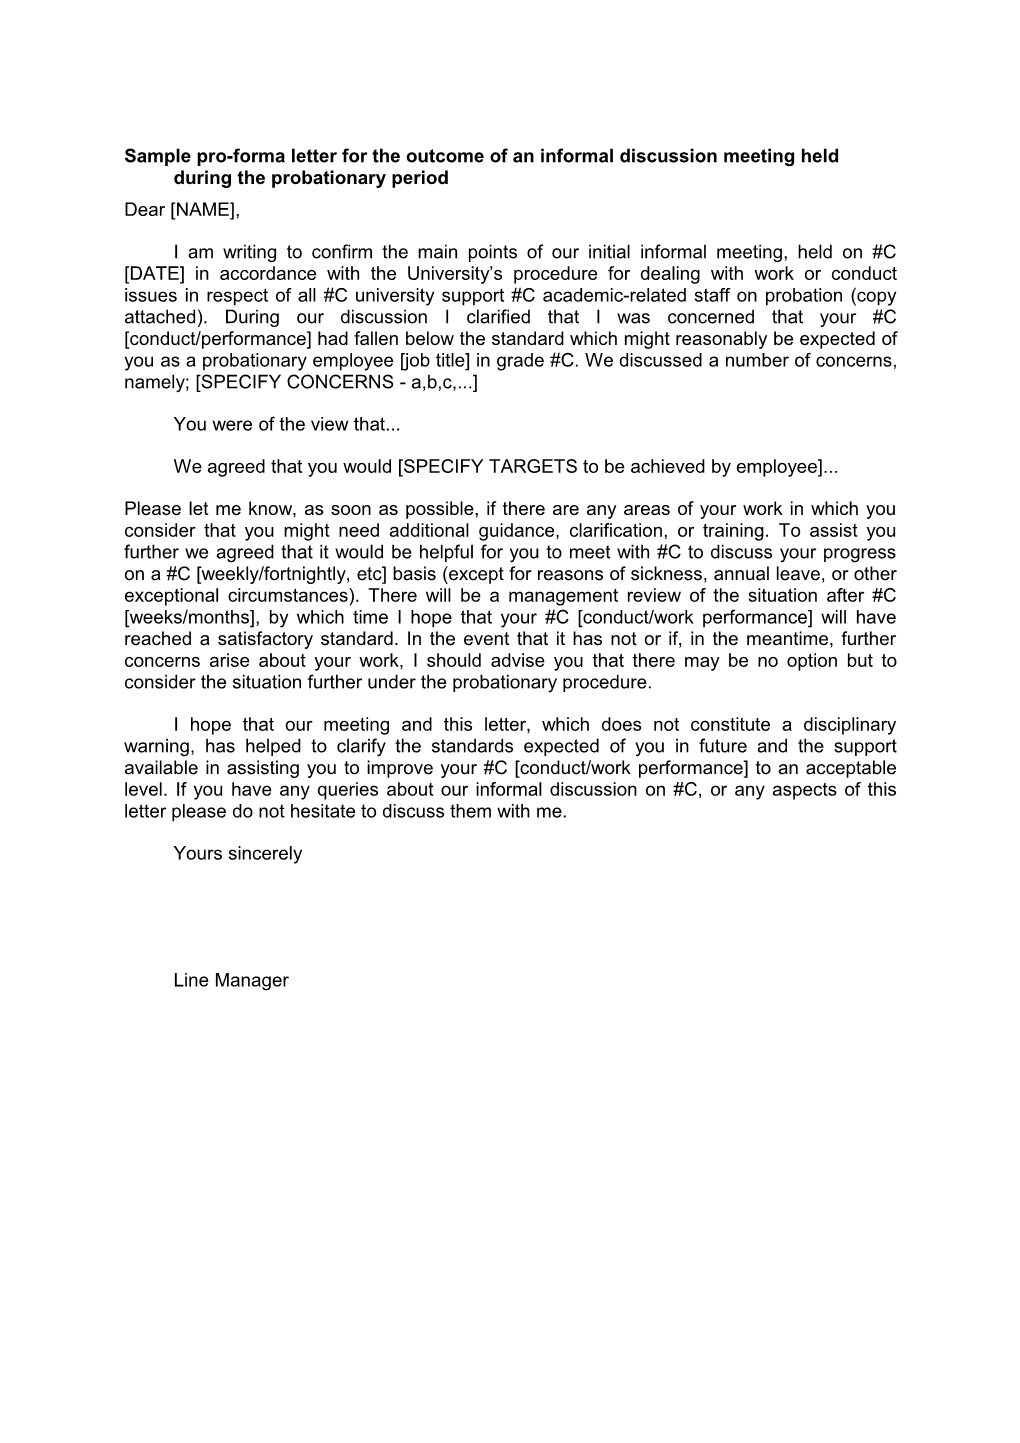 Sample Pro-Forma Letter for the Outcome of an Informal Discussion Meeting Held During The